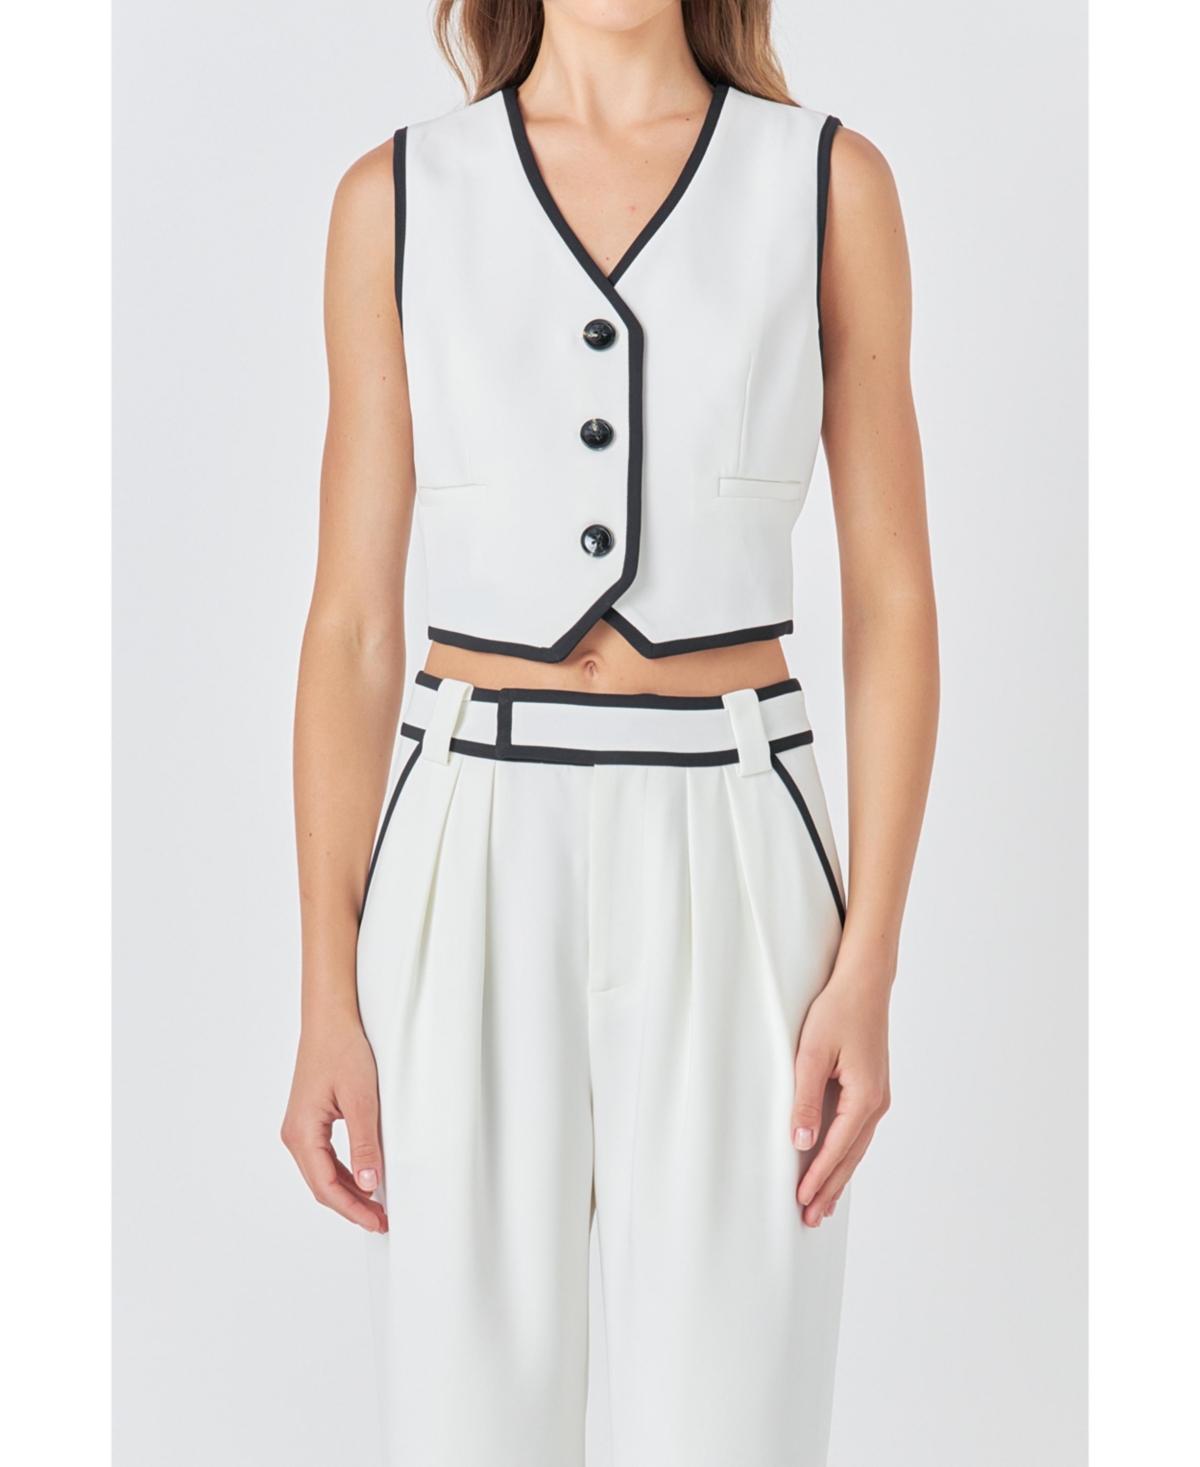 Women's Cropped Vest With Binding Detail - White